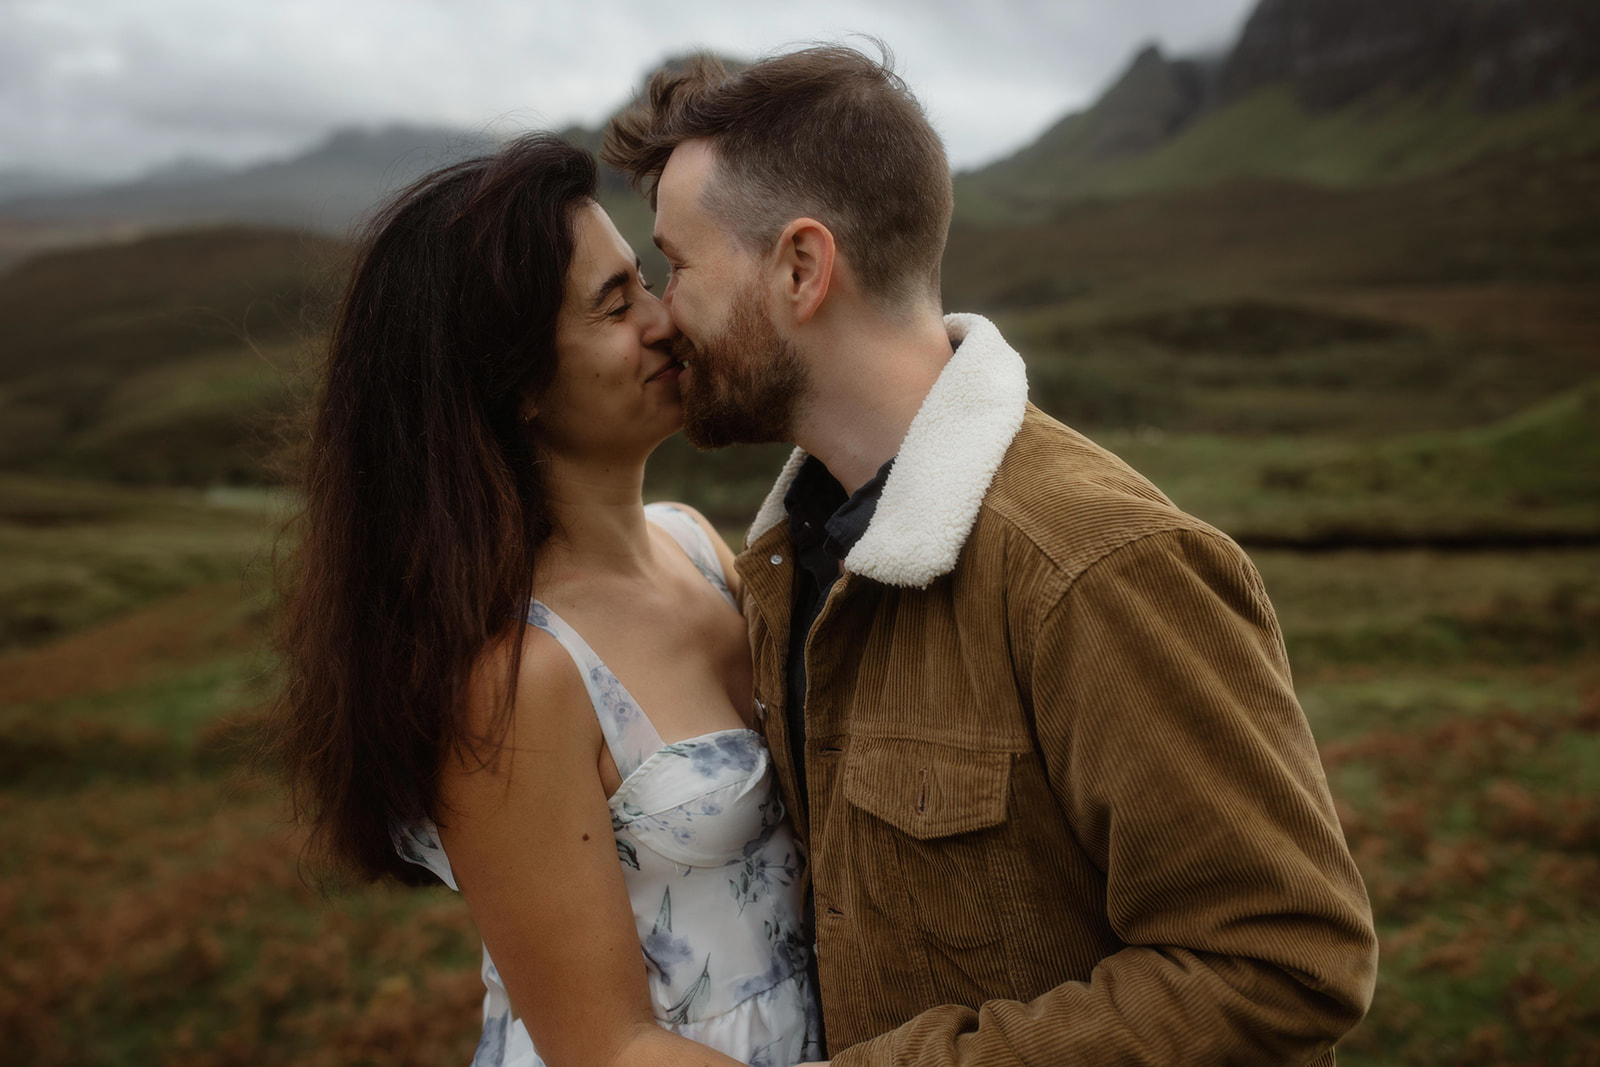 Alex and Elliot shared an intimate moment during their Isle of Skye adventure last September.